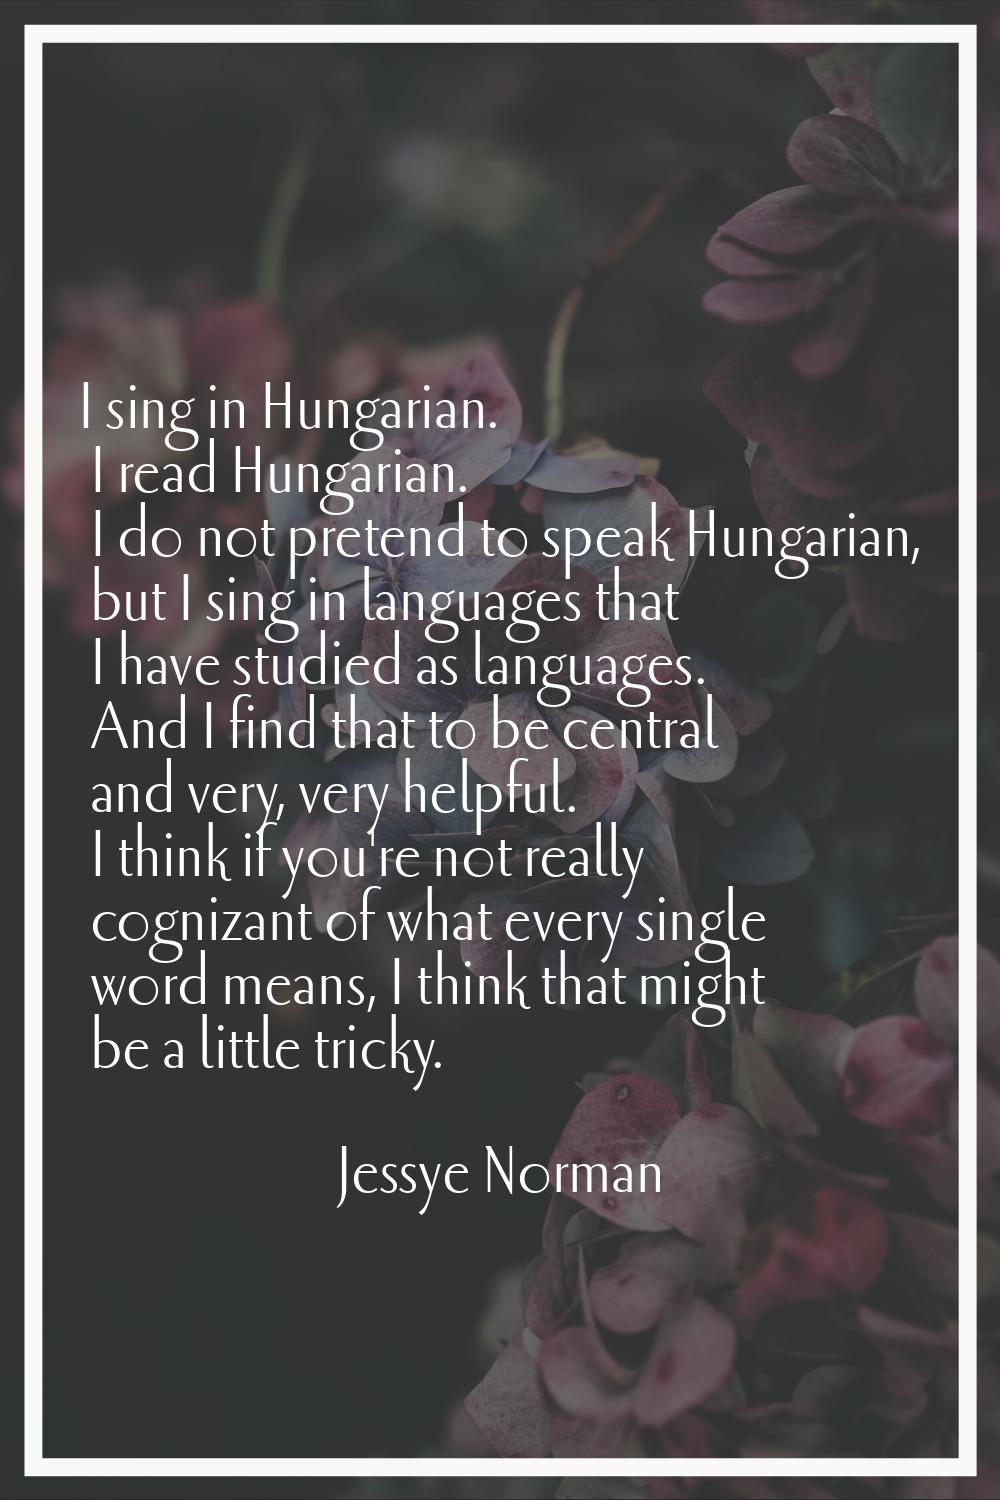 I sing in Hungarian. I read Hungarian. I do not pretend to speak Hungarian, but I sing in languages